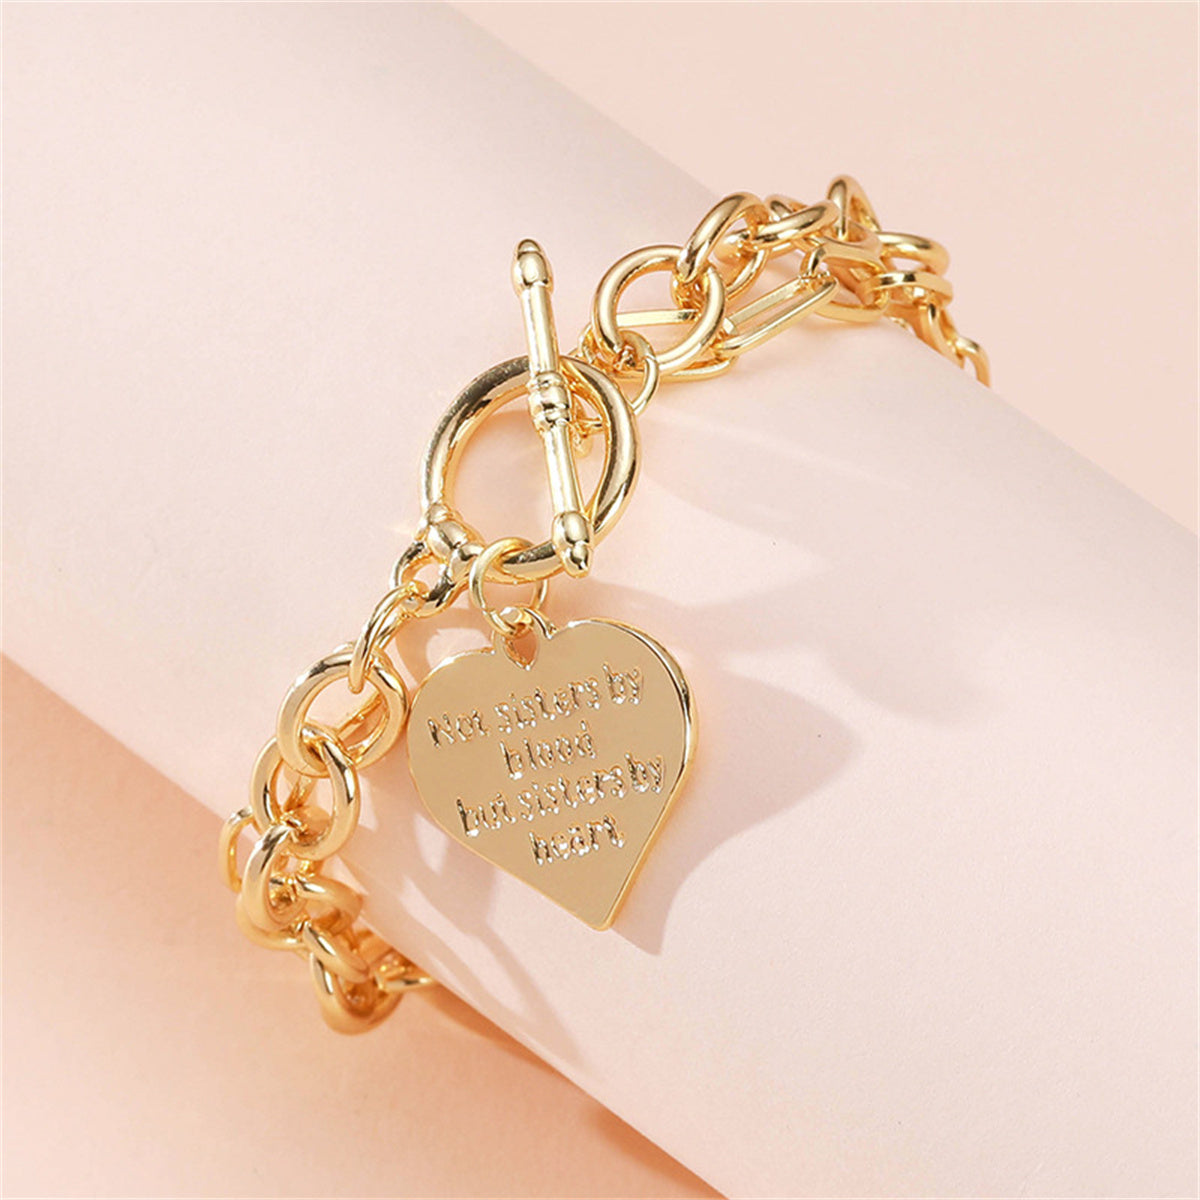 Pearl 18K Gold-Plated 'Sisters' Charm Bracelet